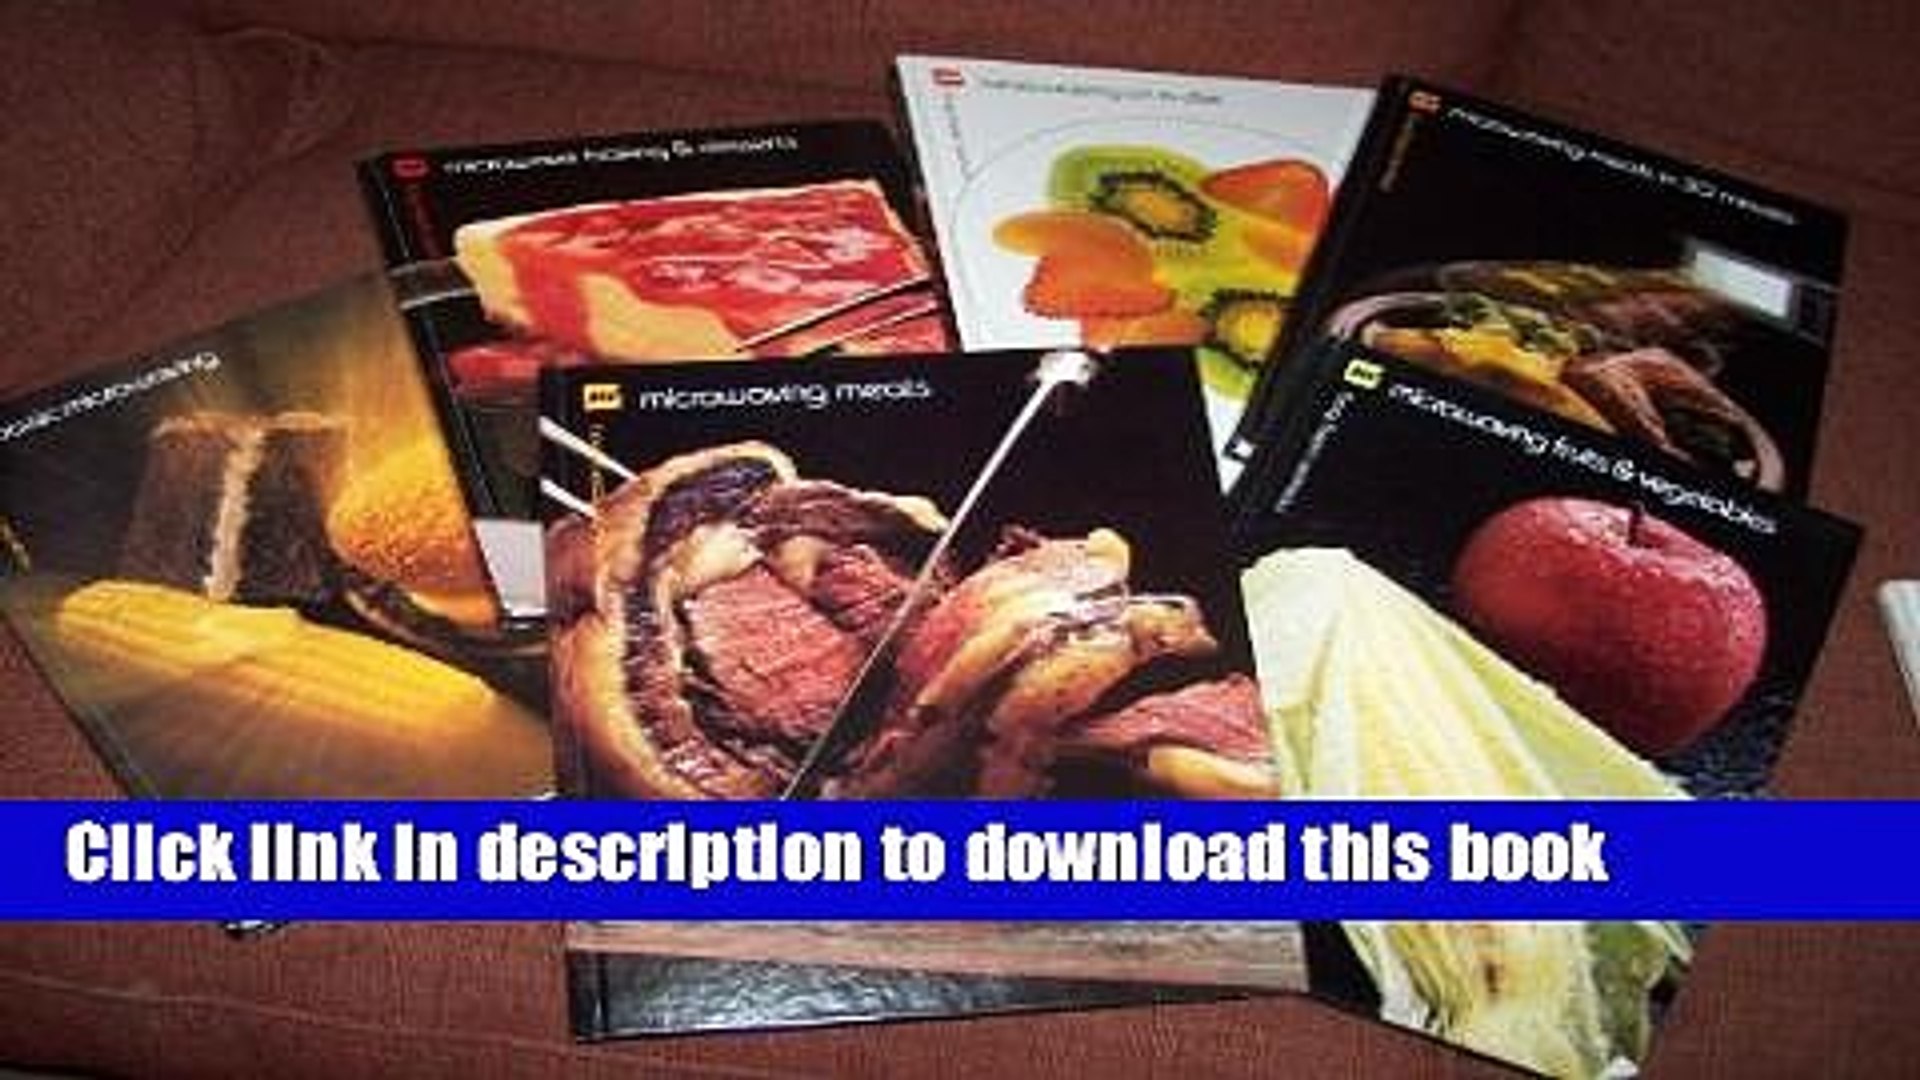 ⁣Books MICROWAVE COOKING LIBRARY (6 Volumes) Baking desserts, Microwaving Meats, Fruits Veg,Meals